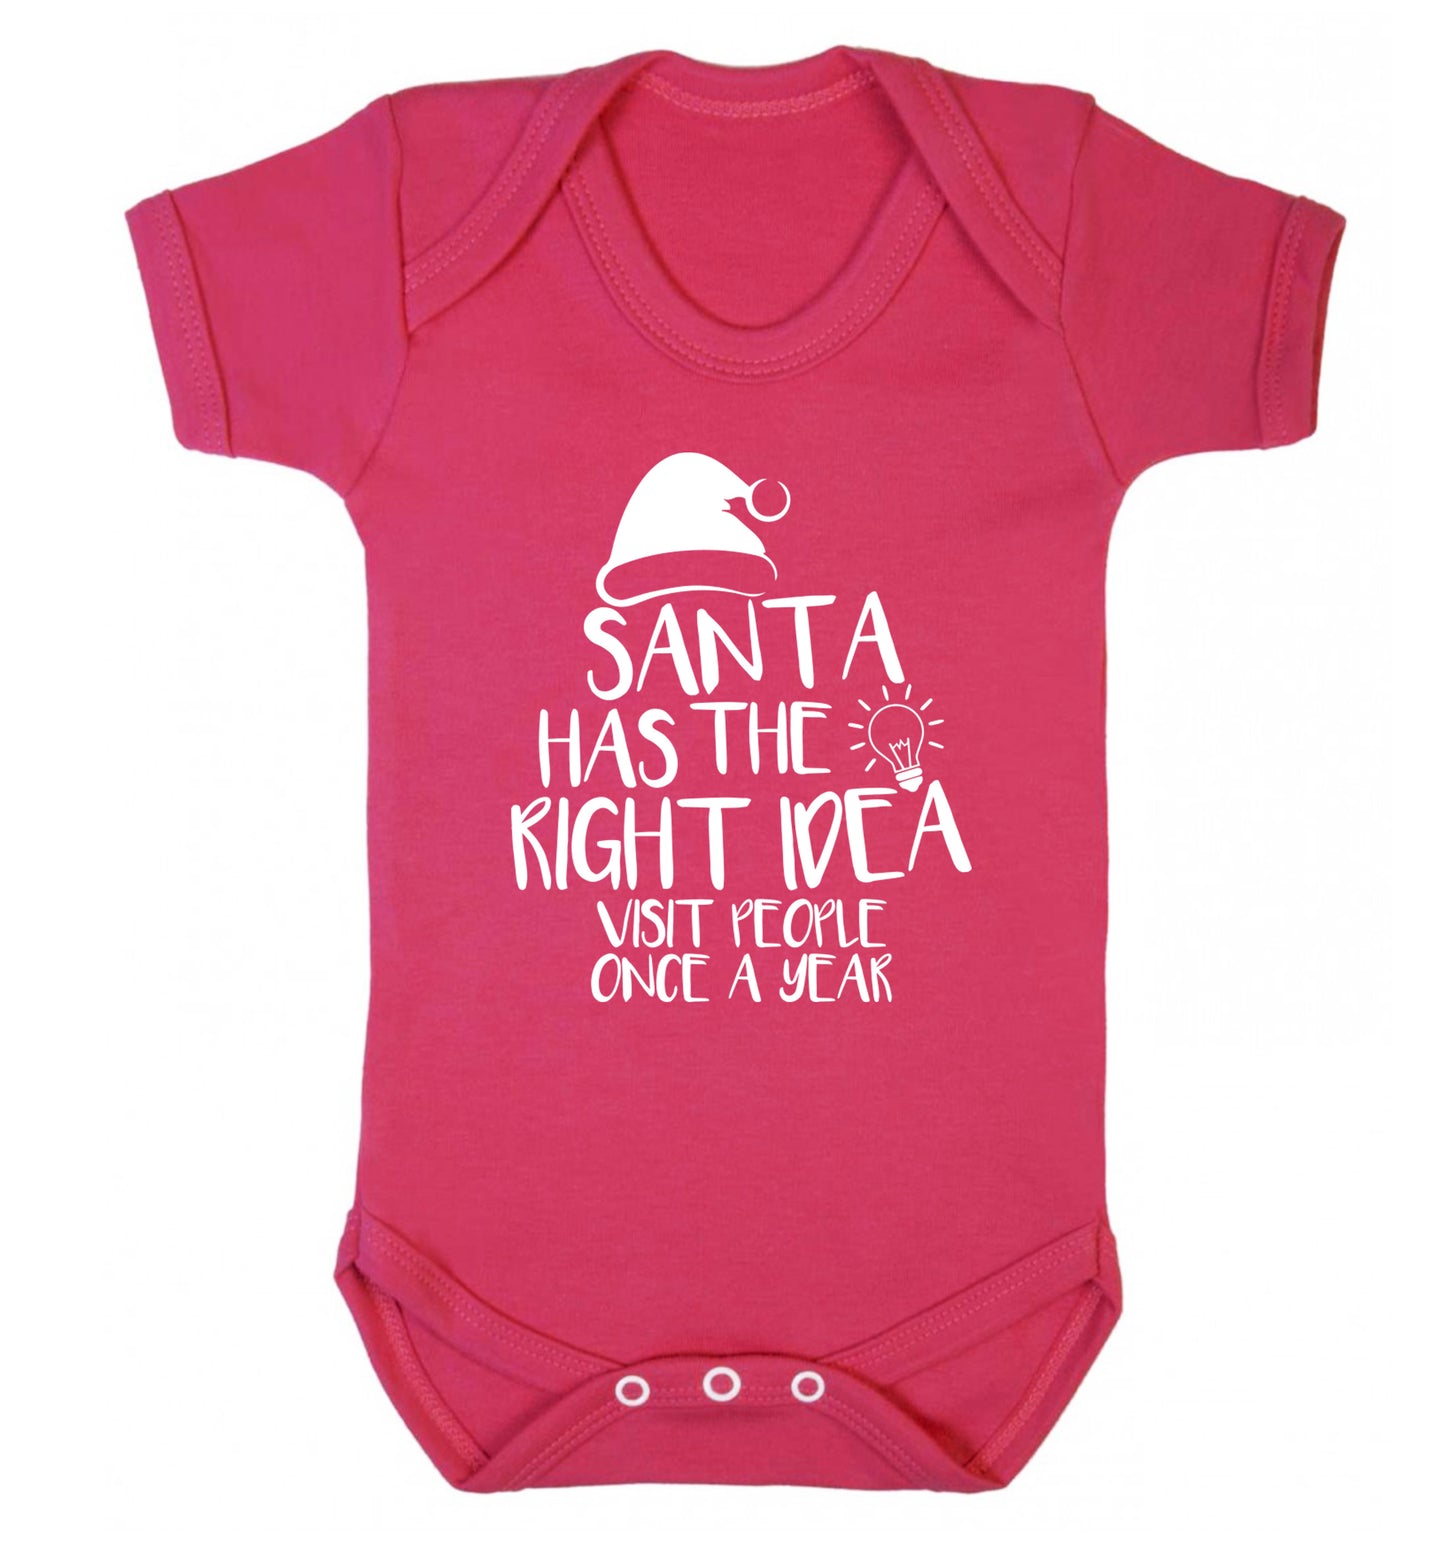 Santa has the right idea visit people once a year Baby Vest dark pink 18-24 months